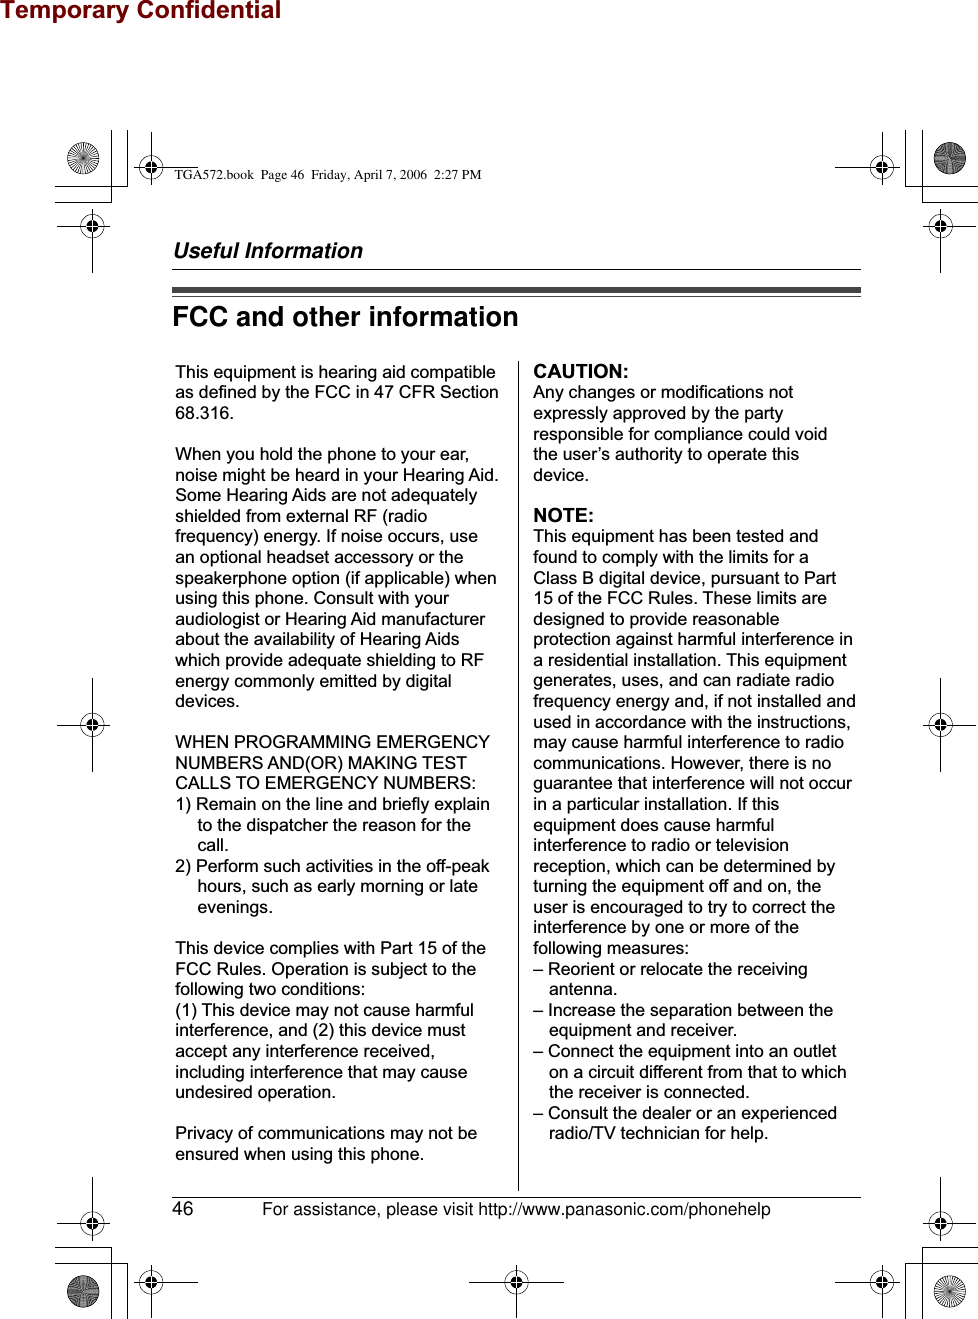 Temporary ConfidentialUseful Information46 For assistance, please visit http://www.panasonic.com/phonehelpFCC and other informationThis equipment is hearing aid compatible as defined by the FCC in 47 CFR Section 68.316.When you hold the phone to your ear, noise might be heard in your Hearing Aid. Some Hearing Aids are not adequately shielded from external RF (radio frequency) energy. If noise occurs, use an optional headset accessory or the speakerphone option (if applicable) when using this phone. Consult with your audiologist or Hearing Aid manufacturer about the availability of Hearing Aids which provide adequate shielding to RF energy commonly emitted by digital devices.WHEN PROGRAMMING EMERGENCY NUMBERS AND(OR) MAKING TEST CALLS TO EMERGENCY NUMBERS:1) Remain on the line and briefly explain to the dispatcher the reason for the call.2) Perform such activities in the off-peak hours, such as early morning or late evenings.This device complies with Part 15 of the FCC Rules. Operation is subject to the following two conditions:(1) This device may not cause harmful interference, and (2) this device must accept any interference received, including interference that may cause undesired operation.Privacy of communications may not be ensured when using this phone.CAUTION:Any changes or modifications not expressly approved by the party responsible for compliance could void the user’s authority to operate this device.NOTE:This equipment has been tested and found to comply with the limits for a Class B digital device, pursuant to Part 15 of the FCC Rules. These limits are designed to provide reasonable protection against harmful interference in a residential installation. This equipment generates, uses, and can radiate radio frequency energy and, if not installed and used in accordance with the instructions, may cause harmful interference to radio communications. However, there is no guarantee that interference will not occur in a particular installation. If this equipment does cause harmful interference to radio or television reception, which can be determined by turning the equipment off and on, the user is encouraged to try to correct the interference by one or more of the following measures:– Reorient or relocate the receiving antenna.– Increase the separation between the equipment and receiver.– Connect the equipment into an outlet on a circuit different from that to which the receiver is connected.– Consult the dealer or an experienced radio/TV technician for help.TGA572.book  Page 46  Friday, April 7, 2006  2:27 PM